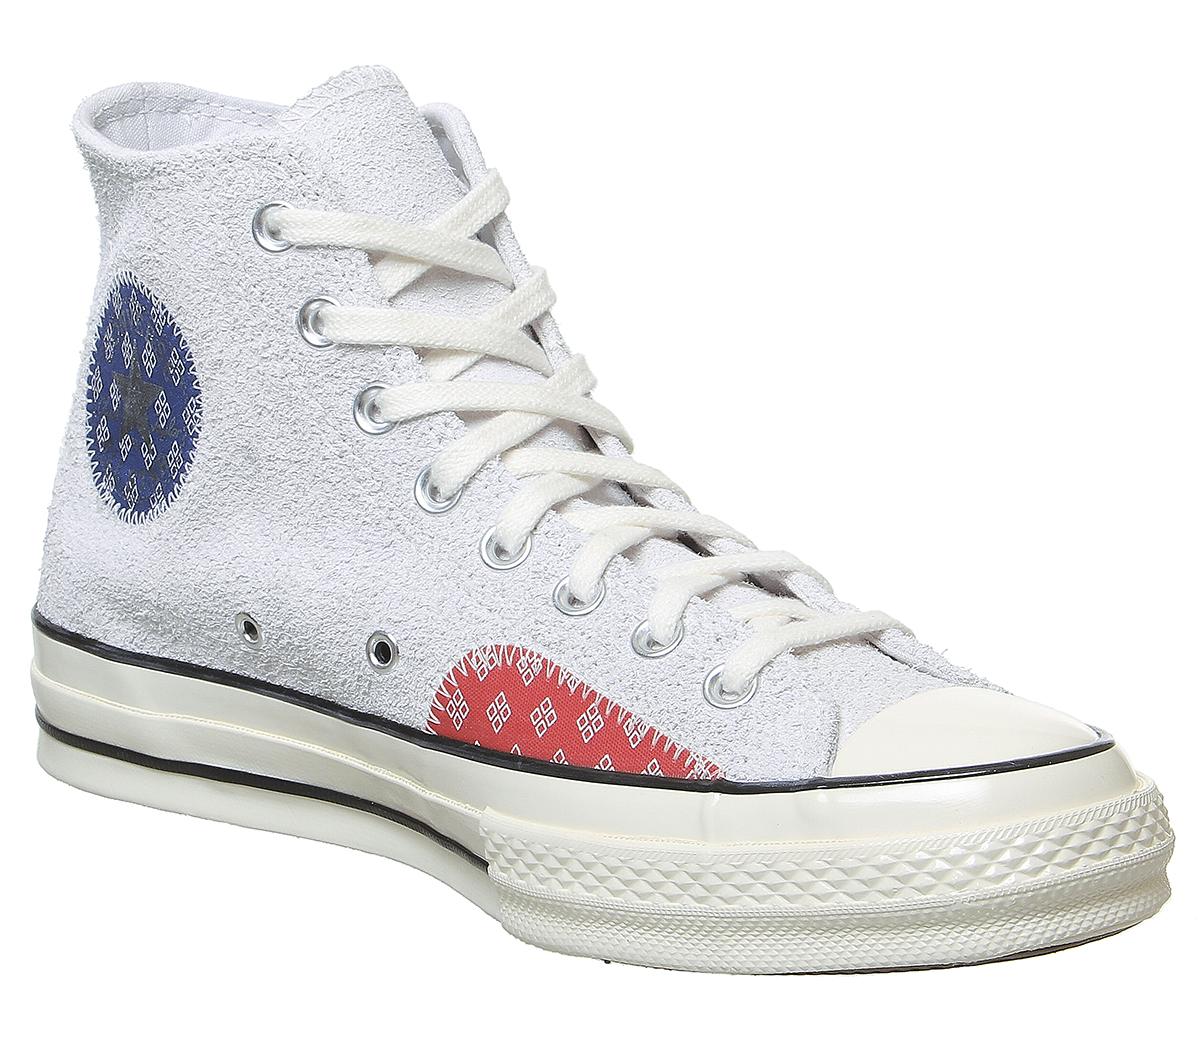 ConverseAll Star Hi 70's TrainersPhoton Dust Rush Blue Patchwork